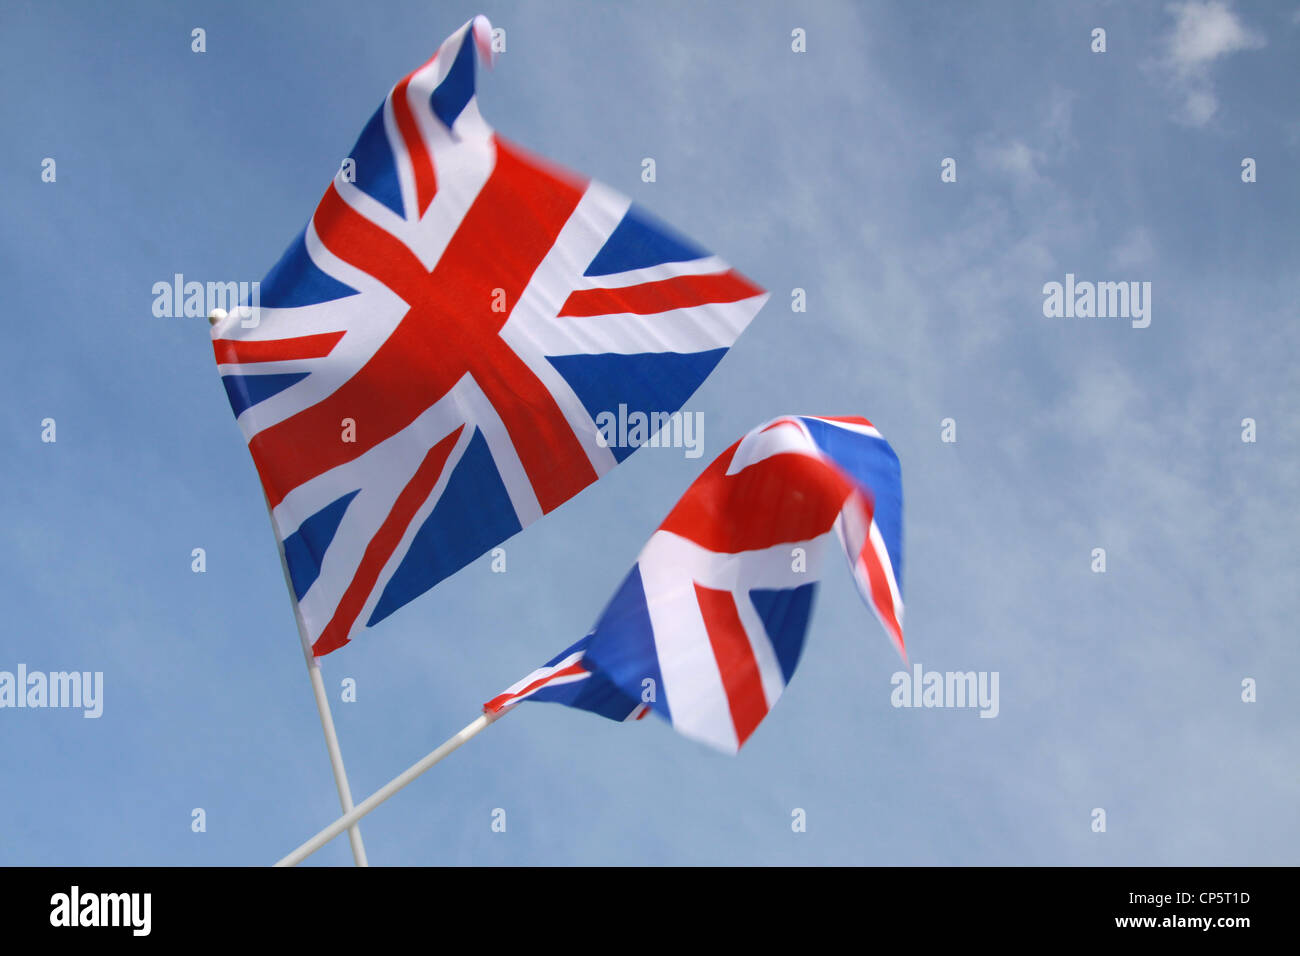 Jubilee United kingdom flags blowing in wind with blue sky in landscape horizontal format Stock Photo